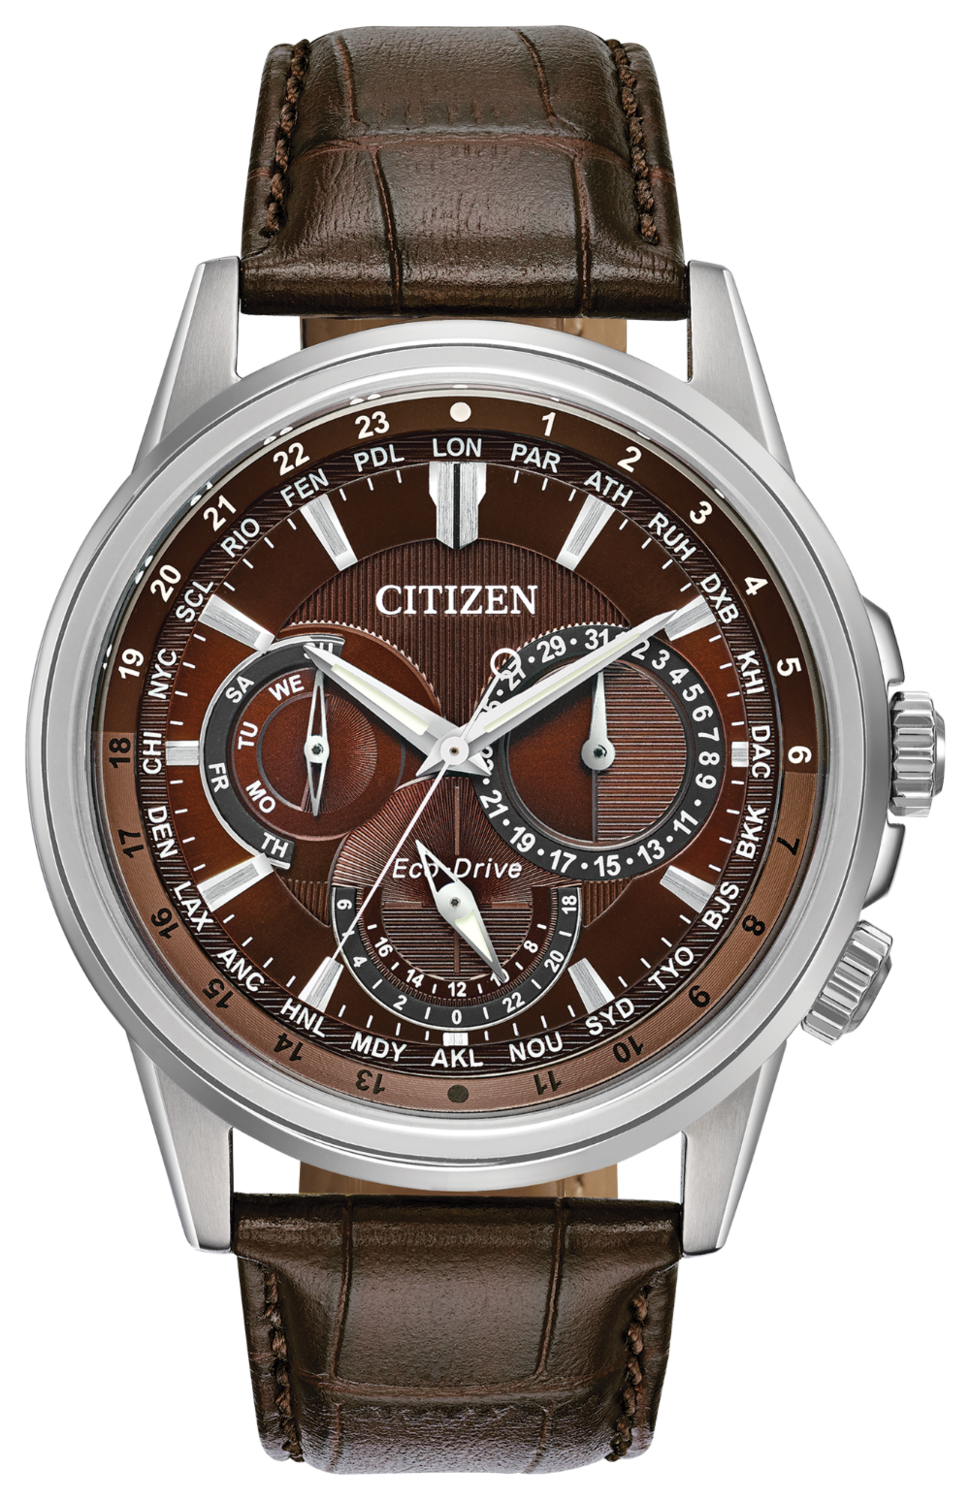 Citizen Ecodrive Calendrier BU2020-29X World Time 44mm brown dial leather band 100m WR sport men's watch (solar or light powered)